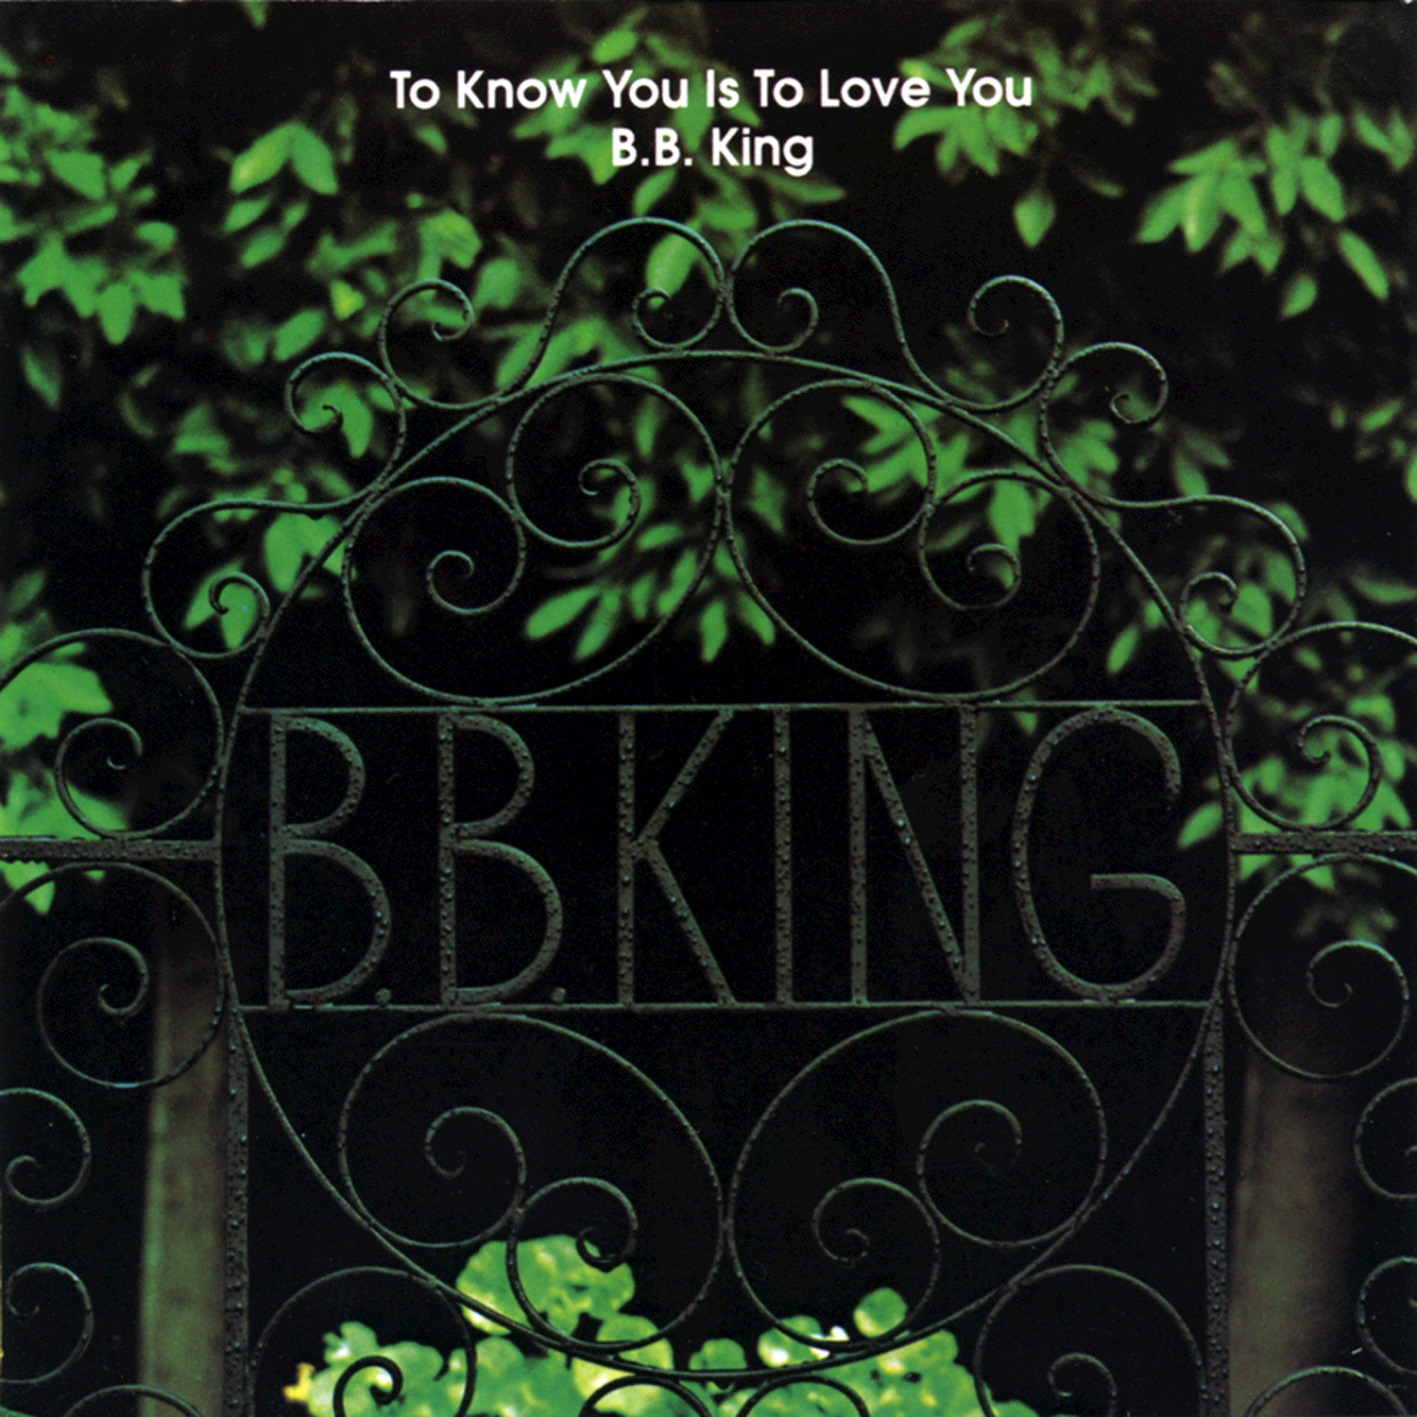 B.B. King – To Know You Is To Love You (1973/2015) [HDTracks FLAC 24bit/192kHz]